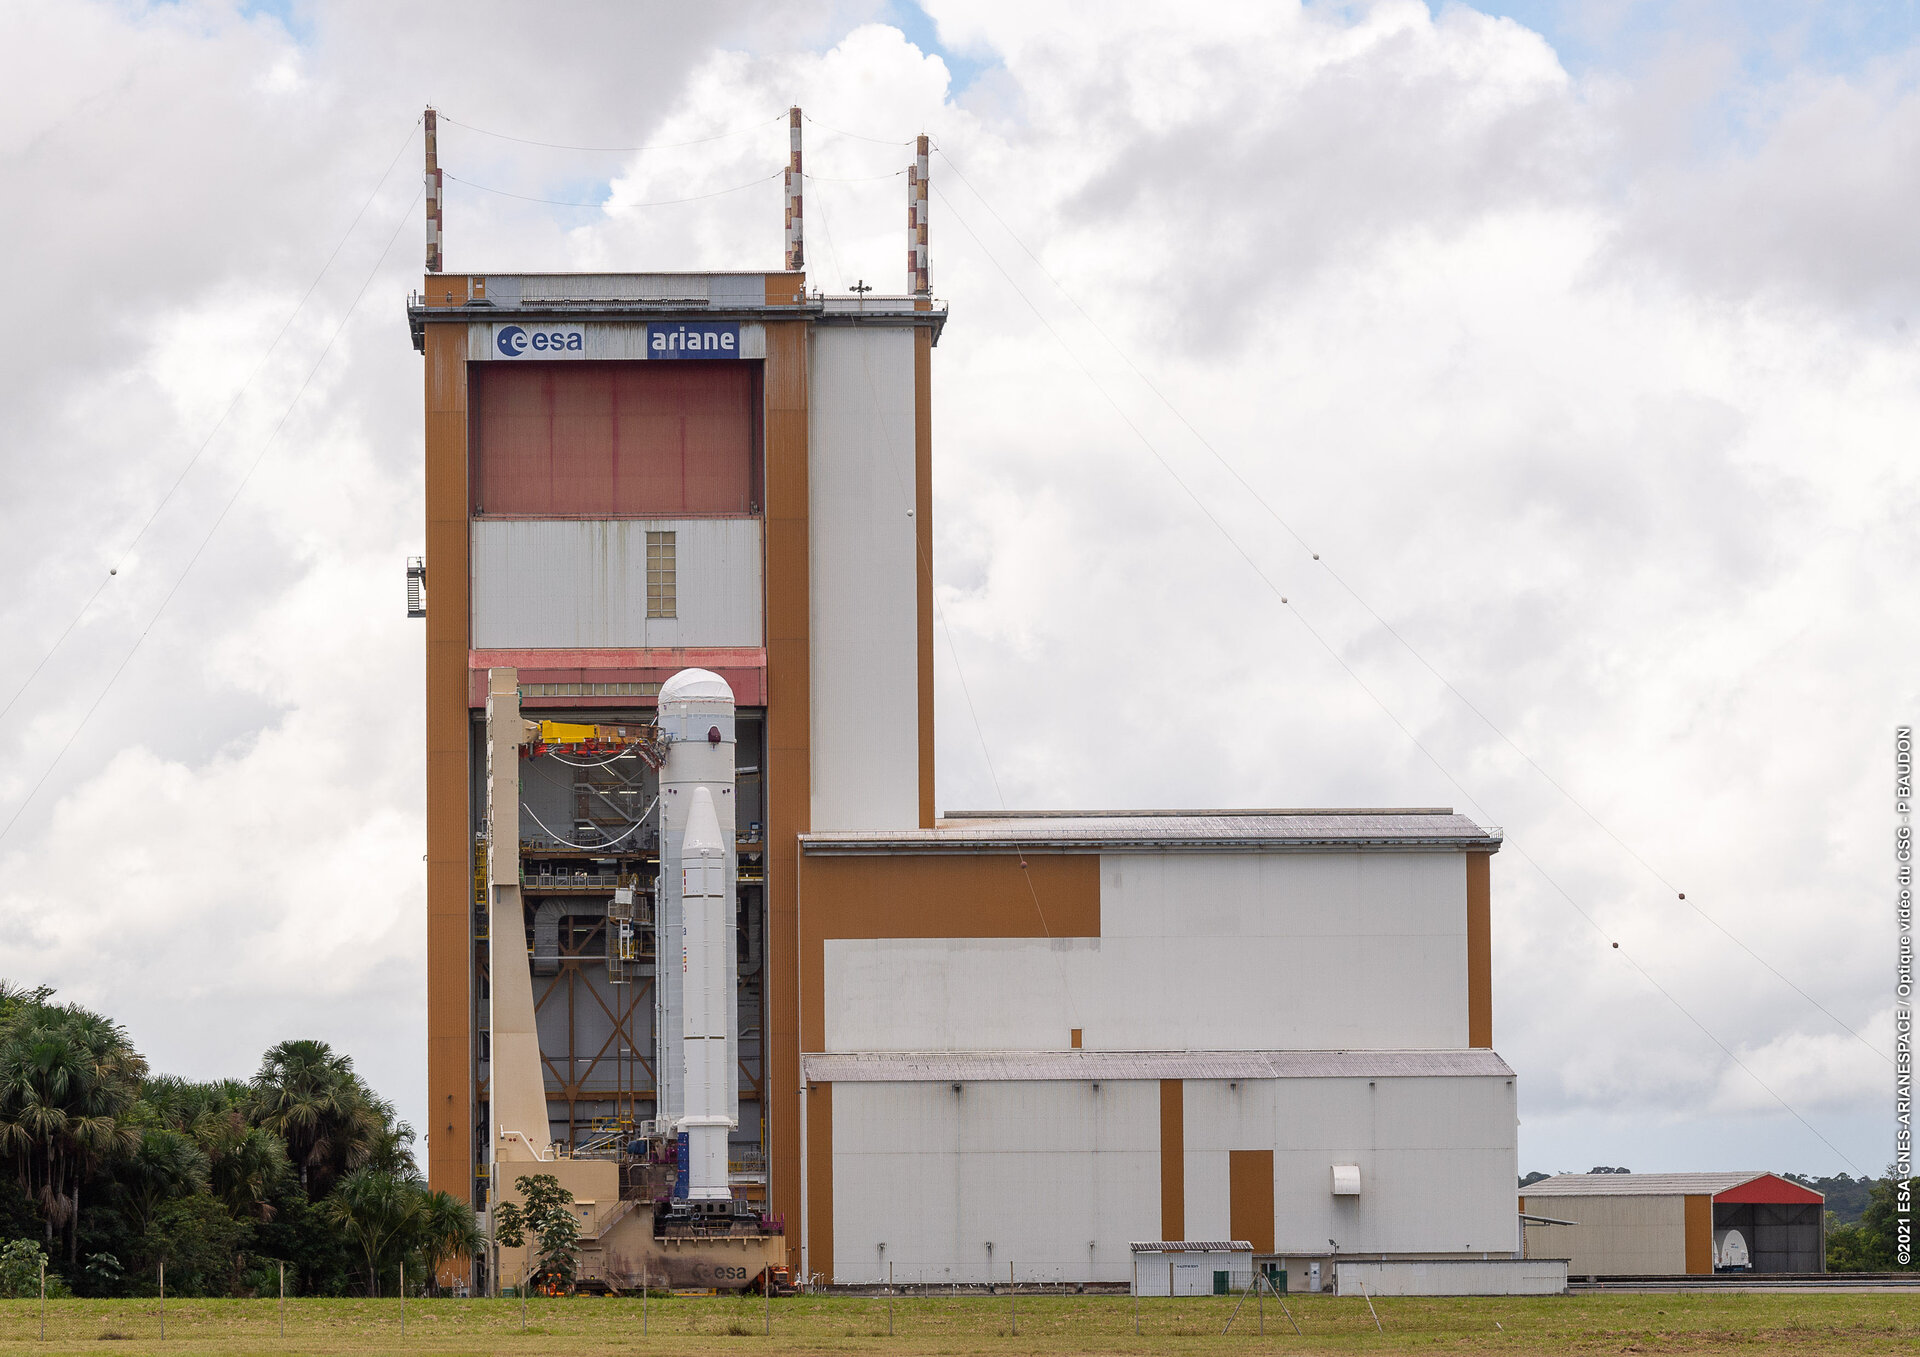 Webb's Ariane 5 launch vehicle arrives at the final assembly building at Europe's Spaceport